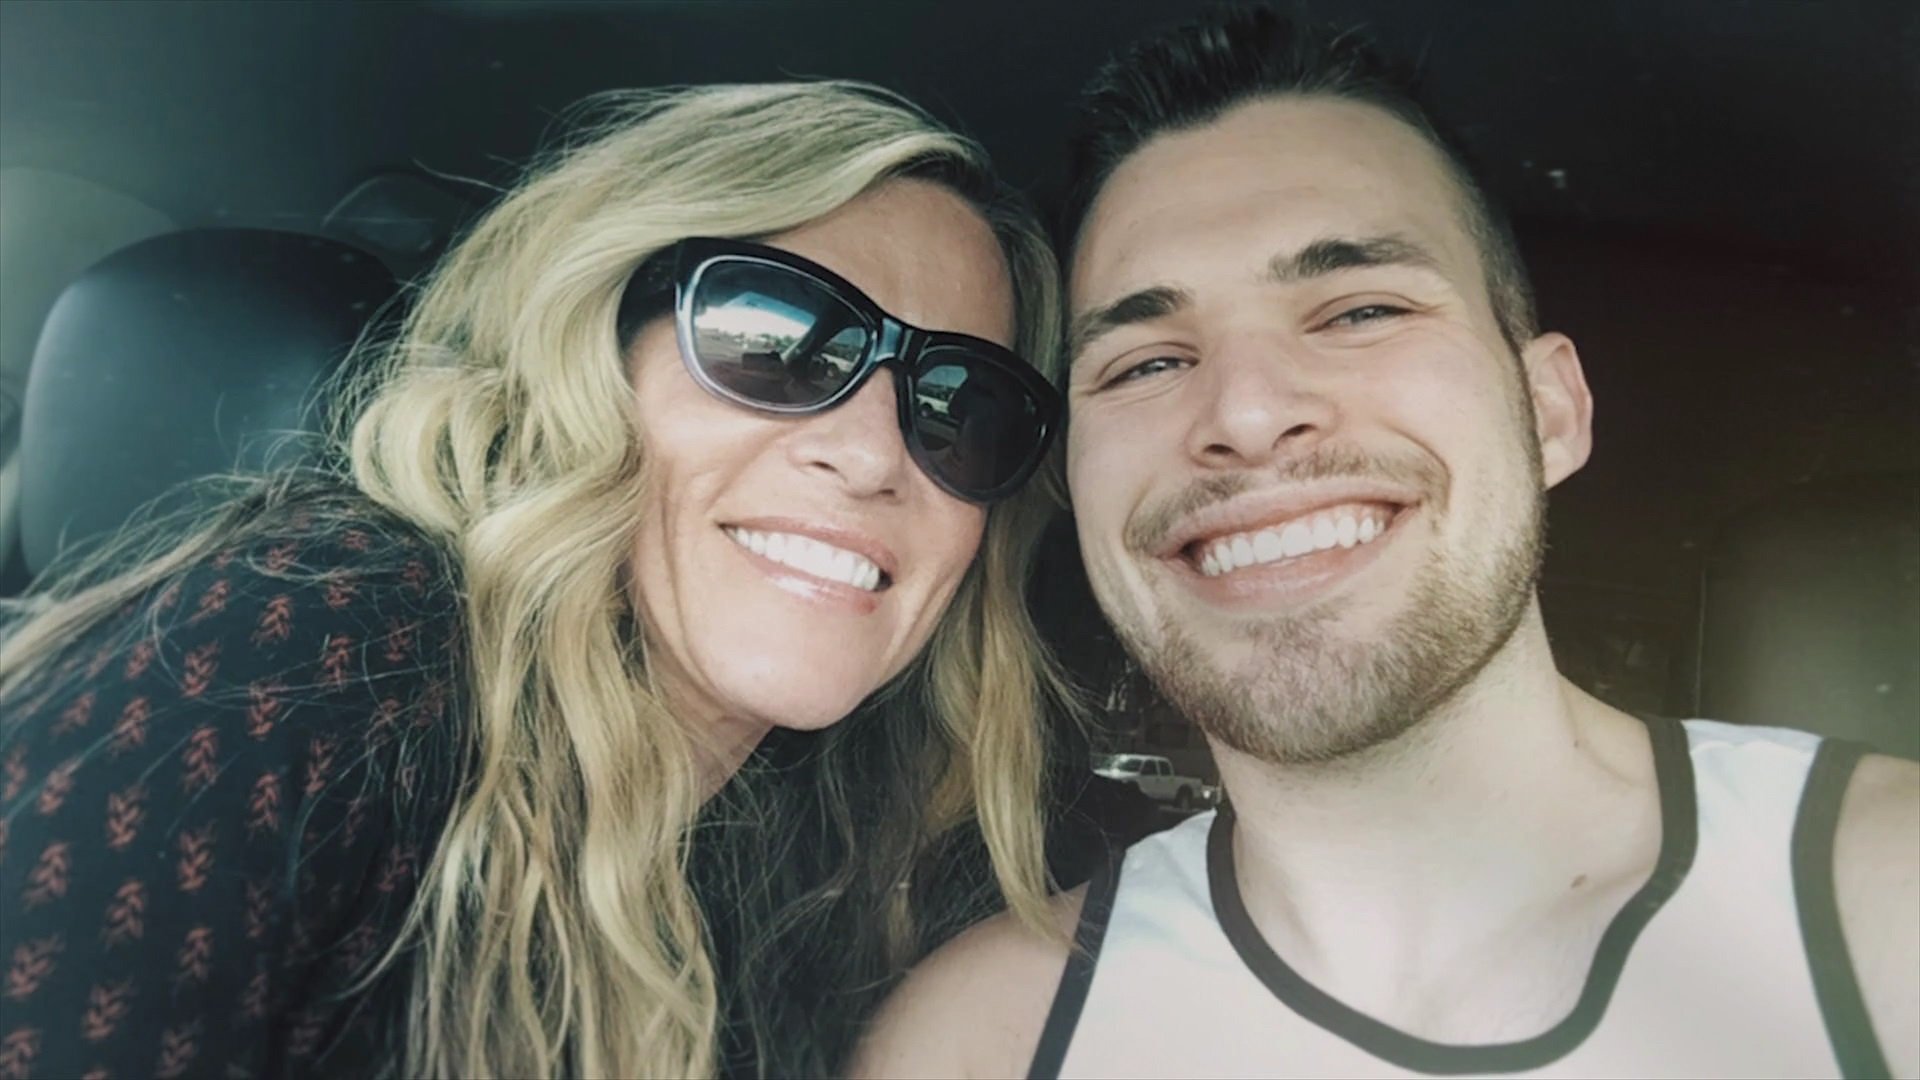 Lori Vallow and Cobly Ryan smiling together for a selfie used in the 'Sins of Our Mother' documentary on Netflix